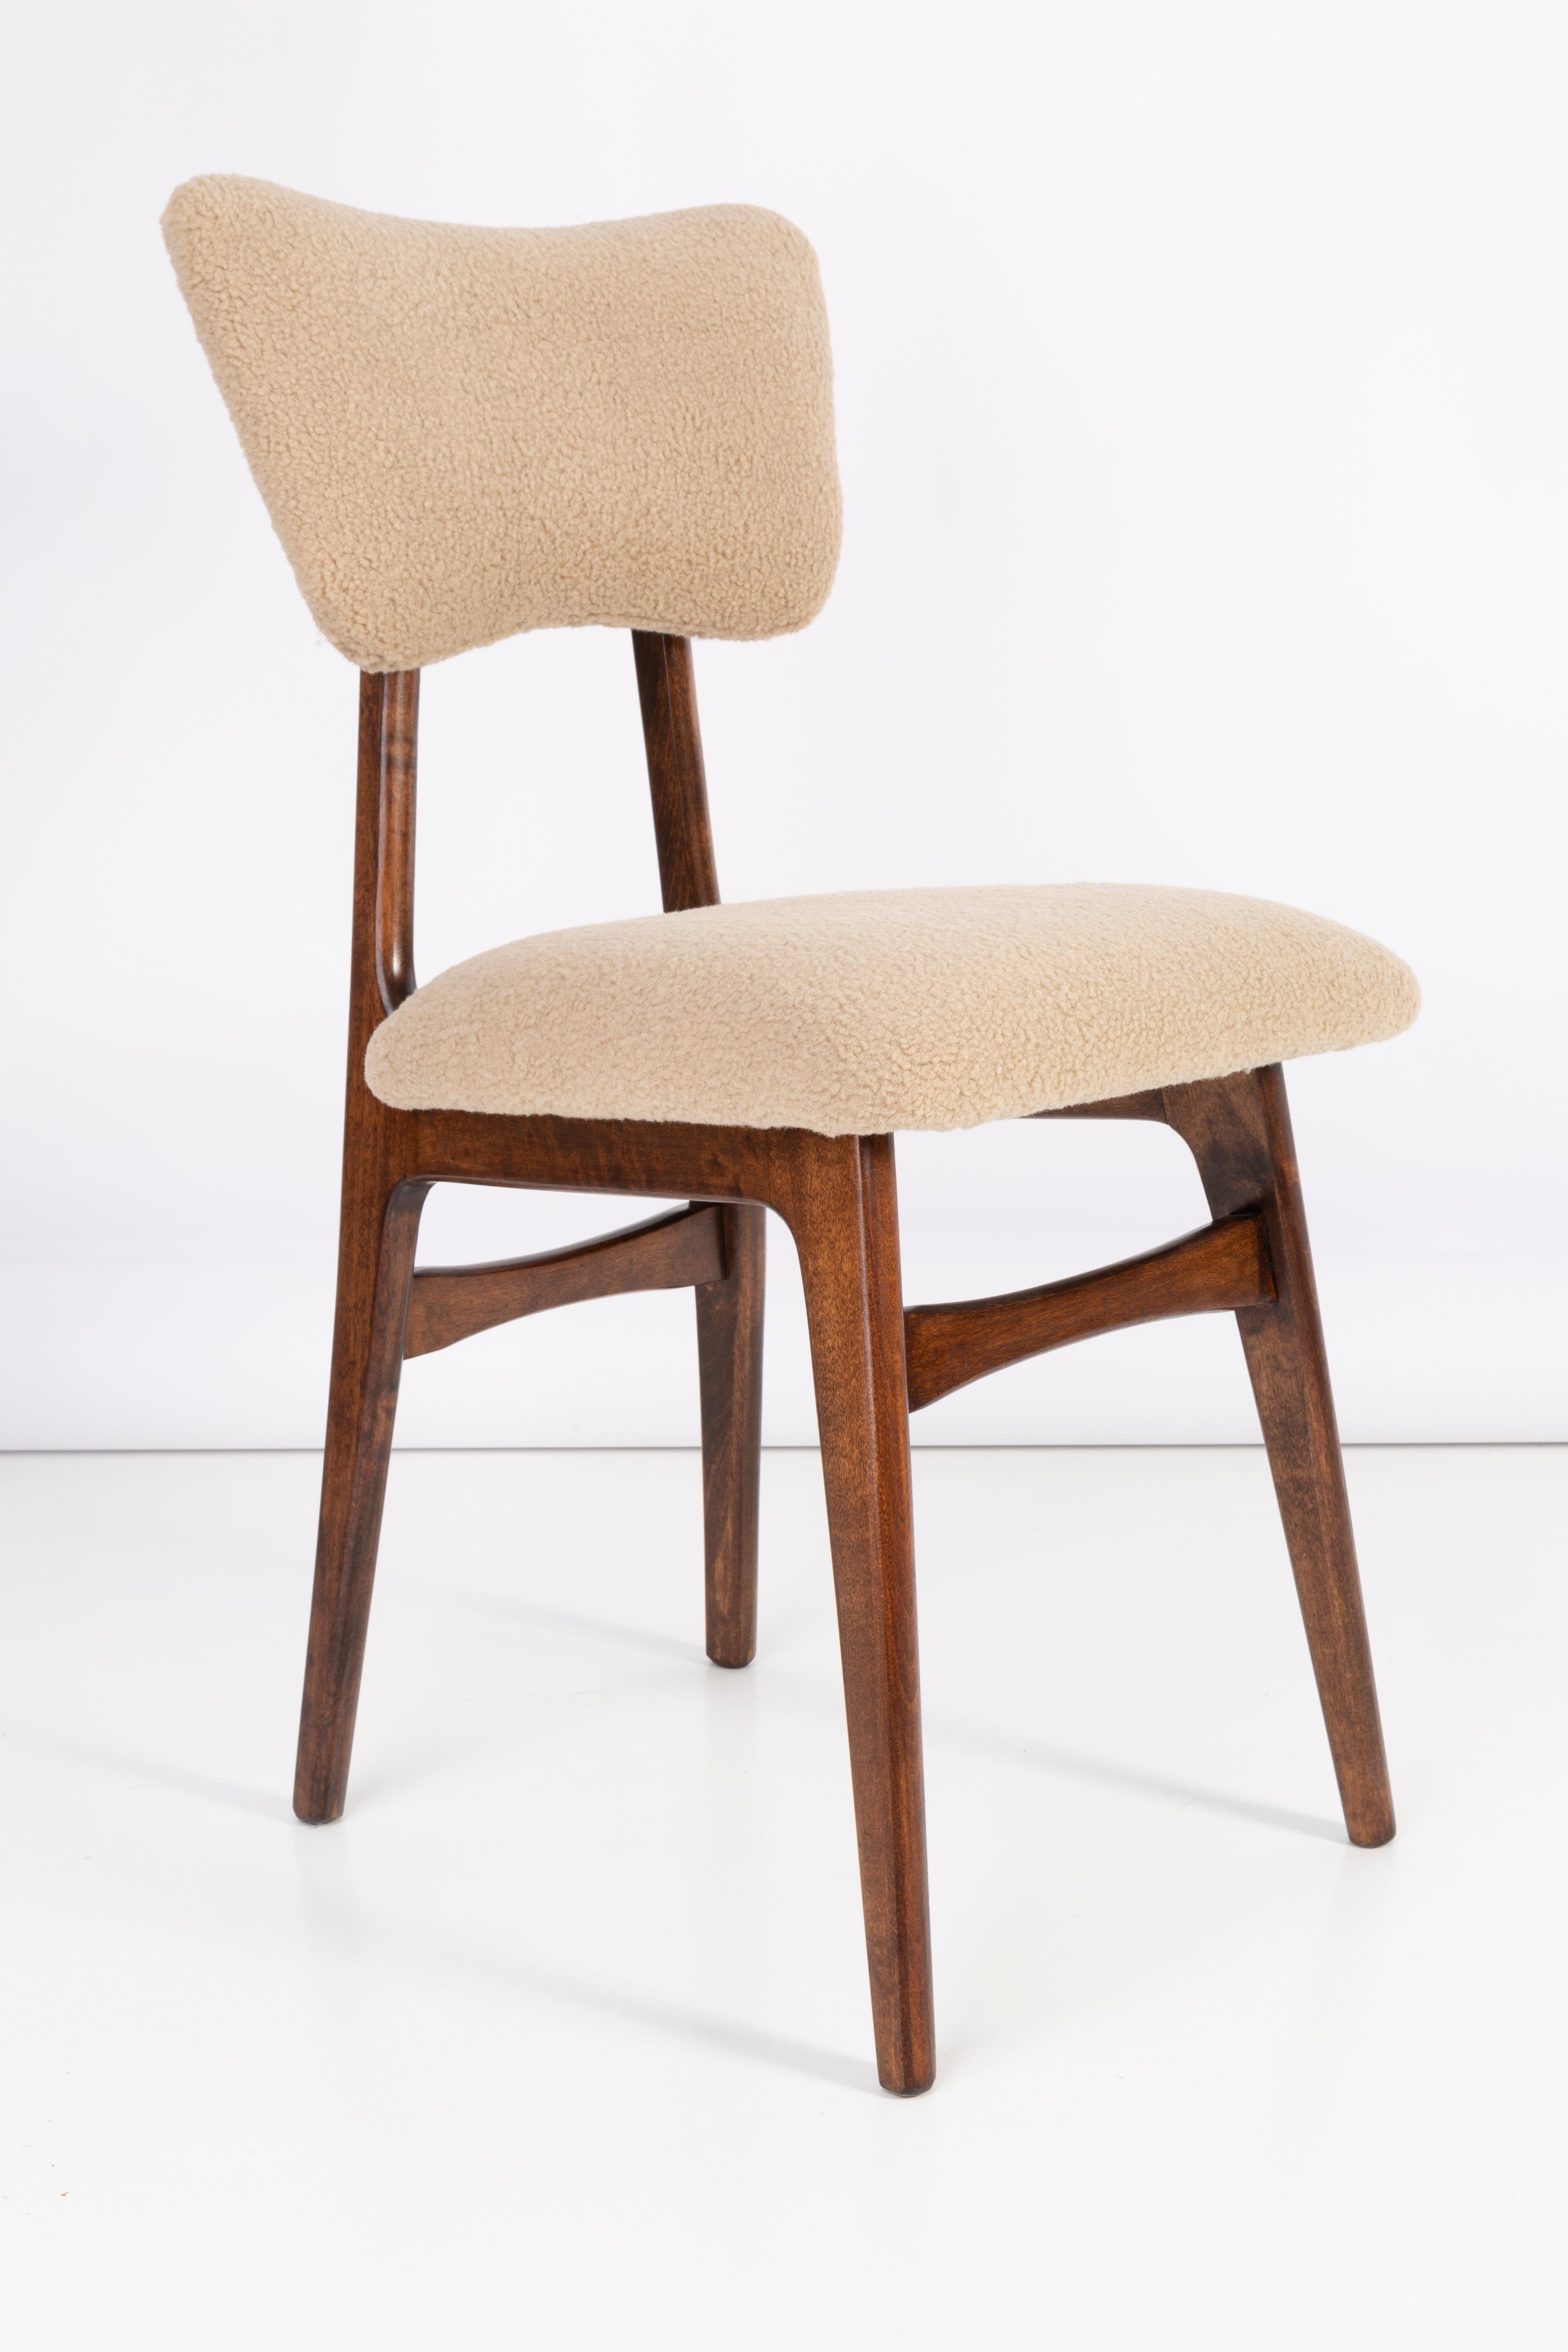 Chair designed by Prof. Rajmund Halas. Made of beechwood. Chair is after a complete upholstery renovation, the woodwork has been refreshed. Seat and back is dressed in camel, durable and pleasant to the touch boucle fabric. Chair is stable and very